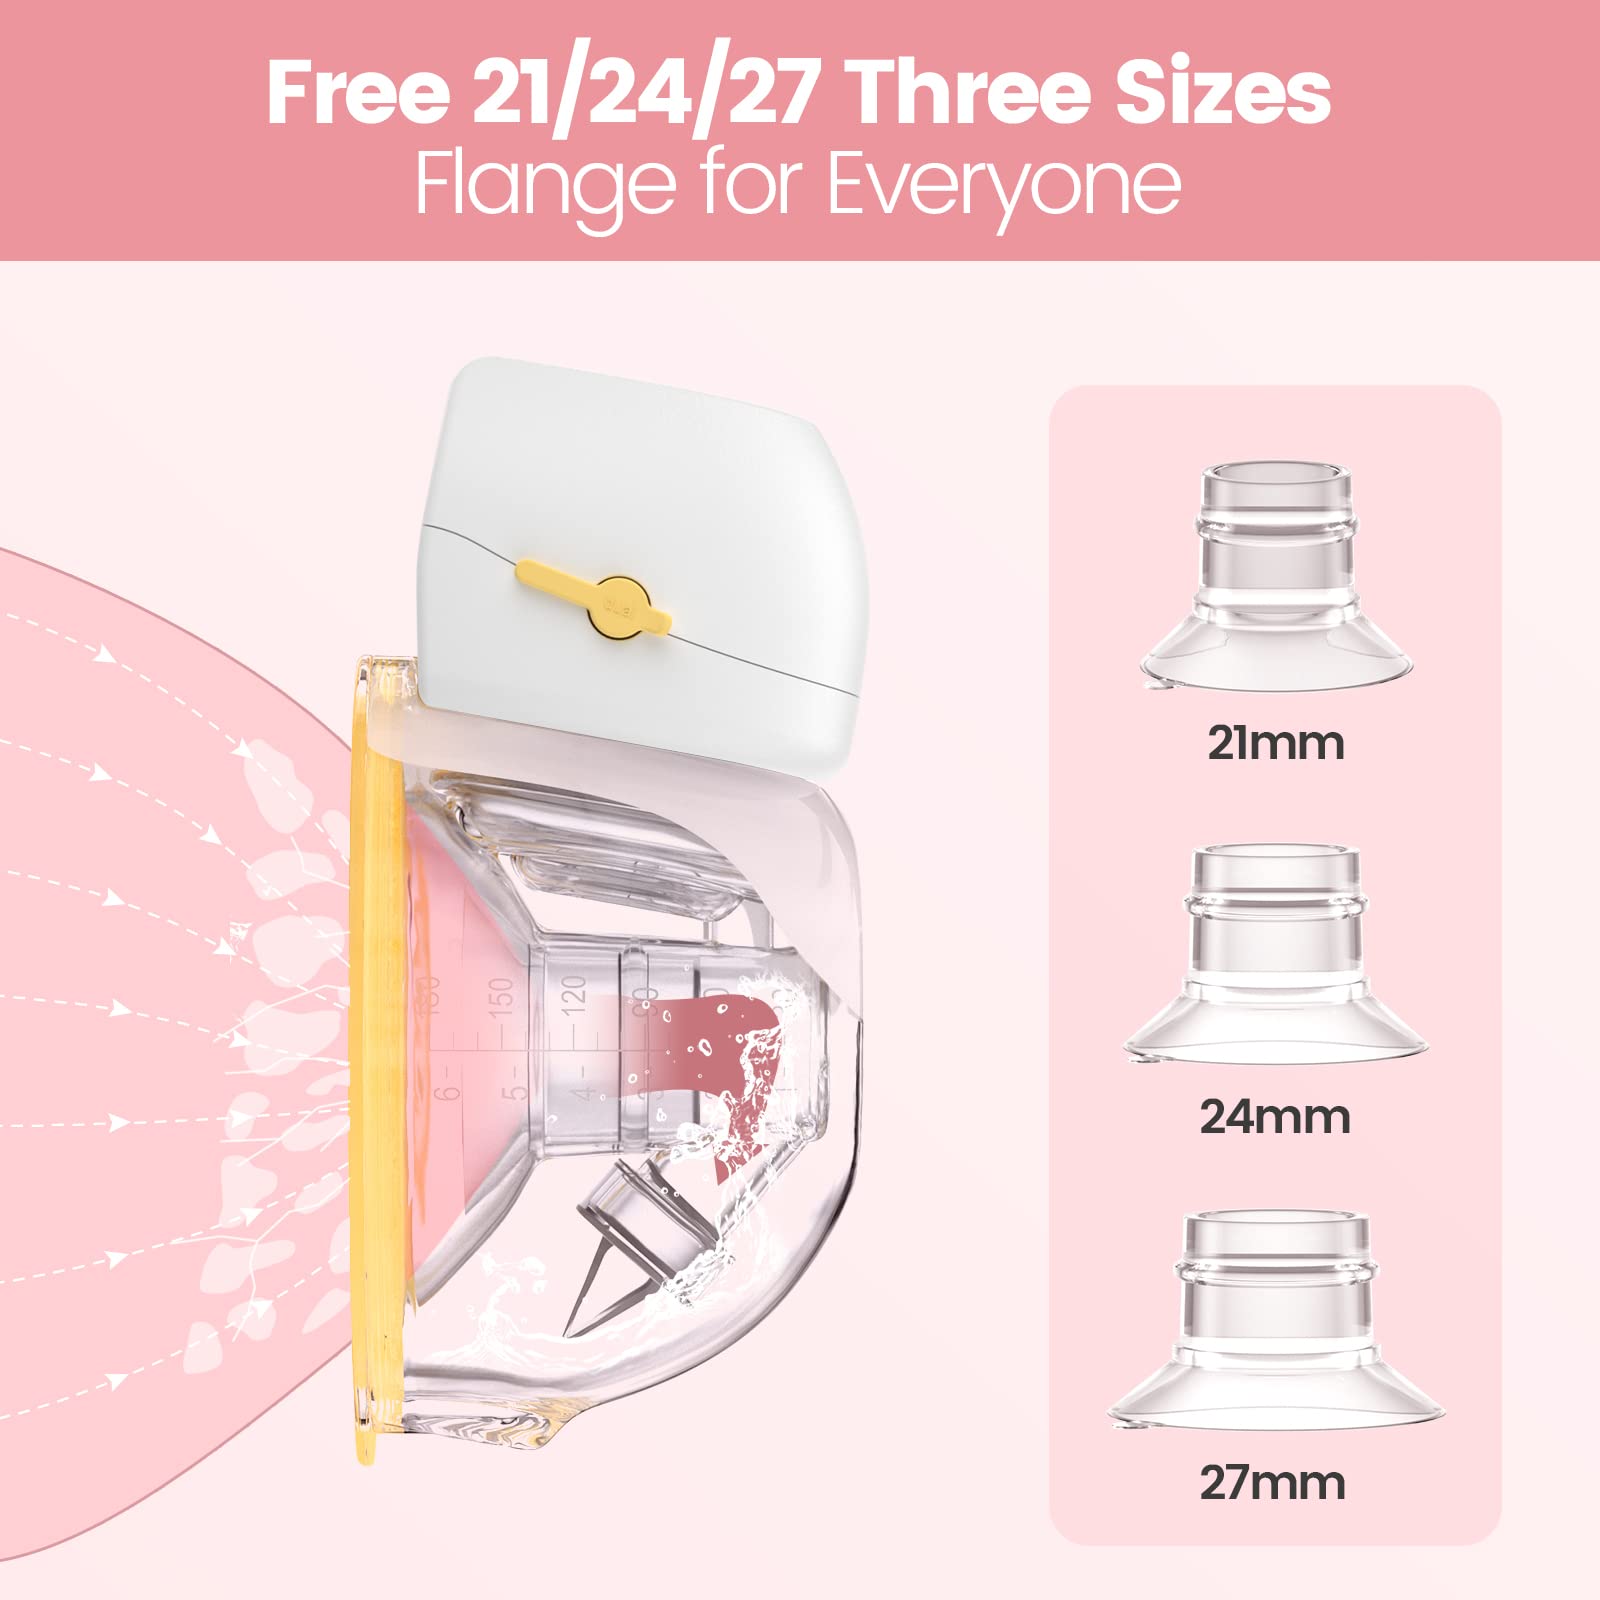 Double Wearable Breast Pump, SEOYO Hands Free Portable Electric Breast Breastfeeding Pump with LCD Display, with 3 Modes & 9 Levels Memory Function and Hands Free Painless